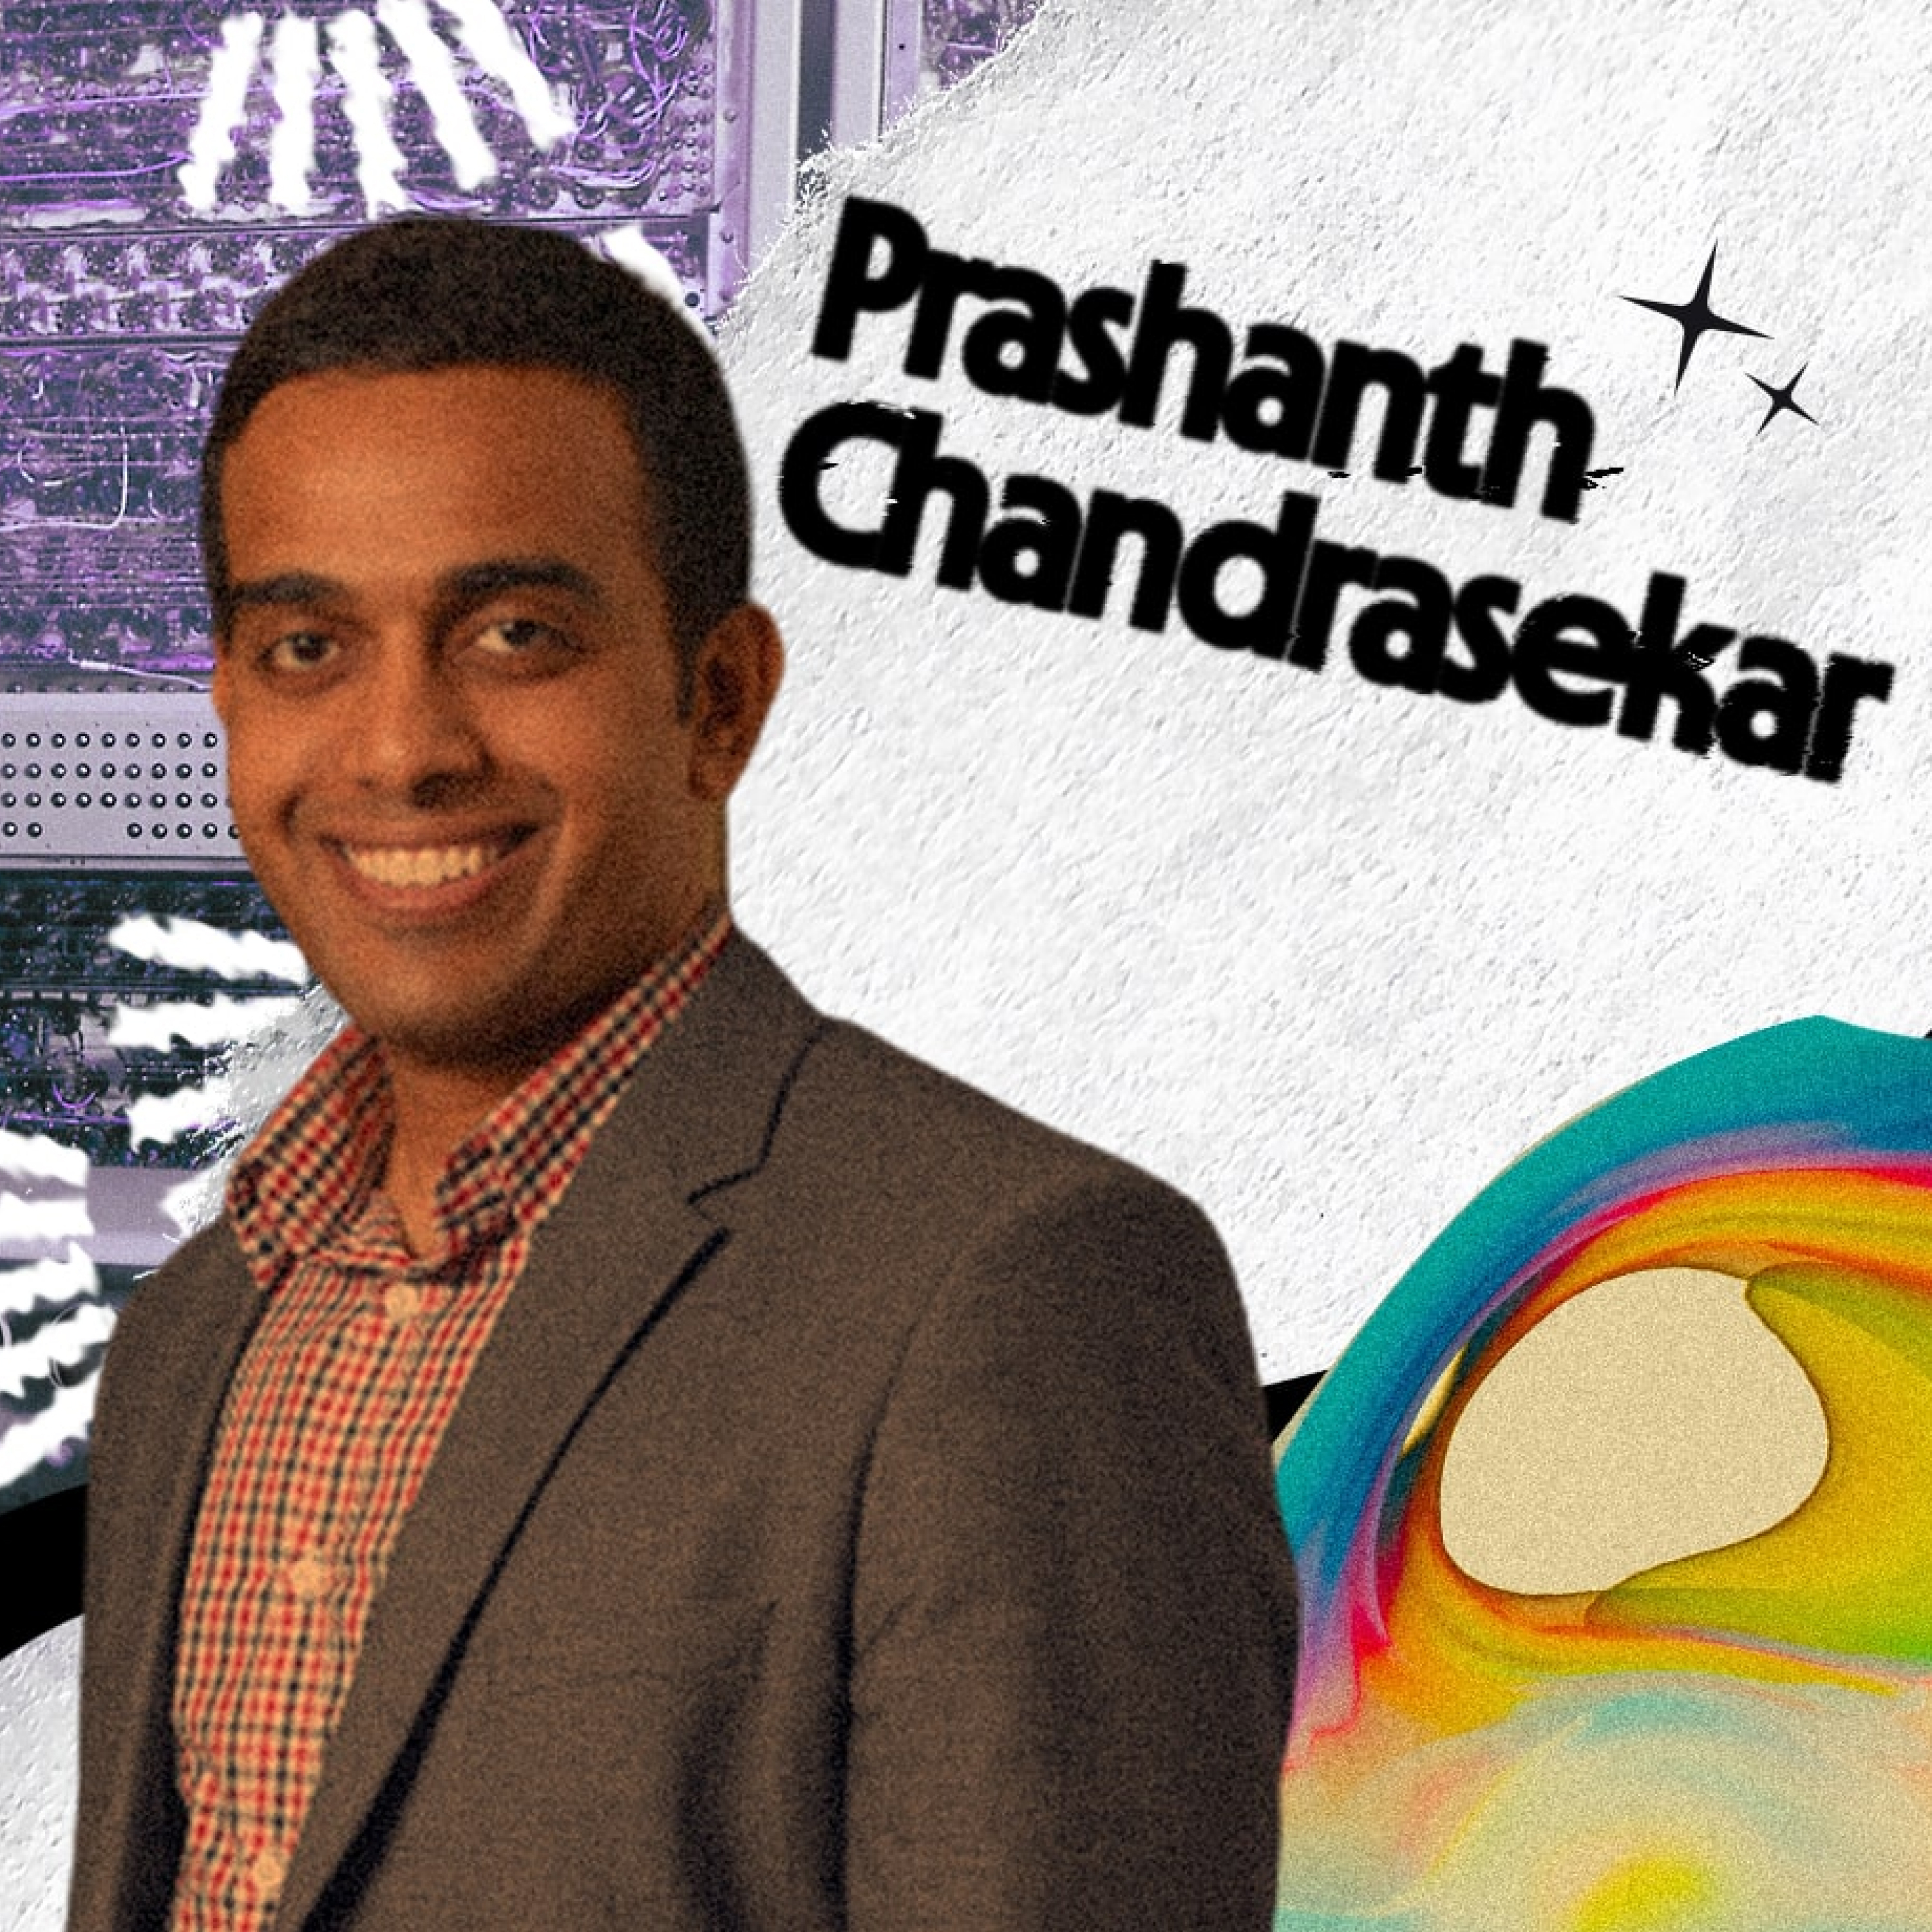 Stack Overflow CEO Prashanth Chandrasekar on writing the script of the future